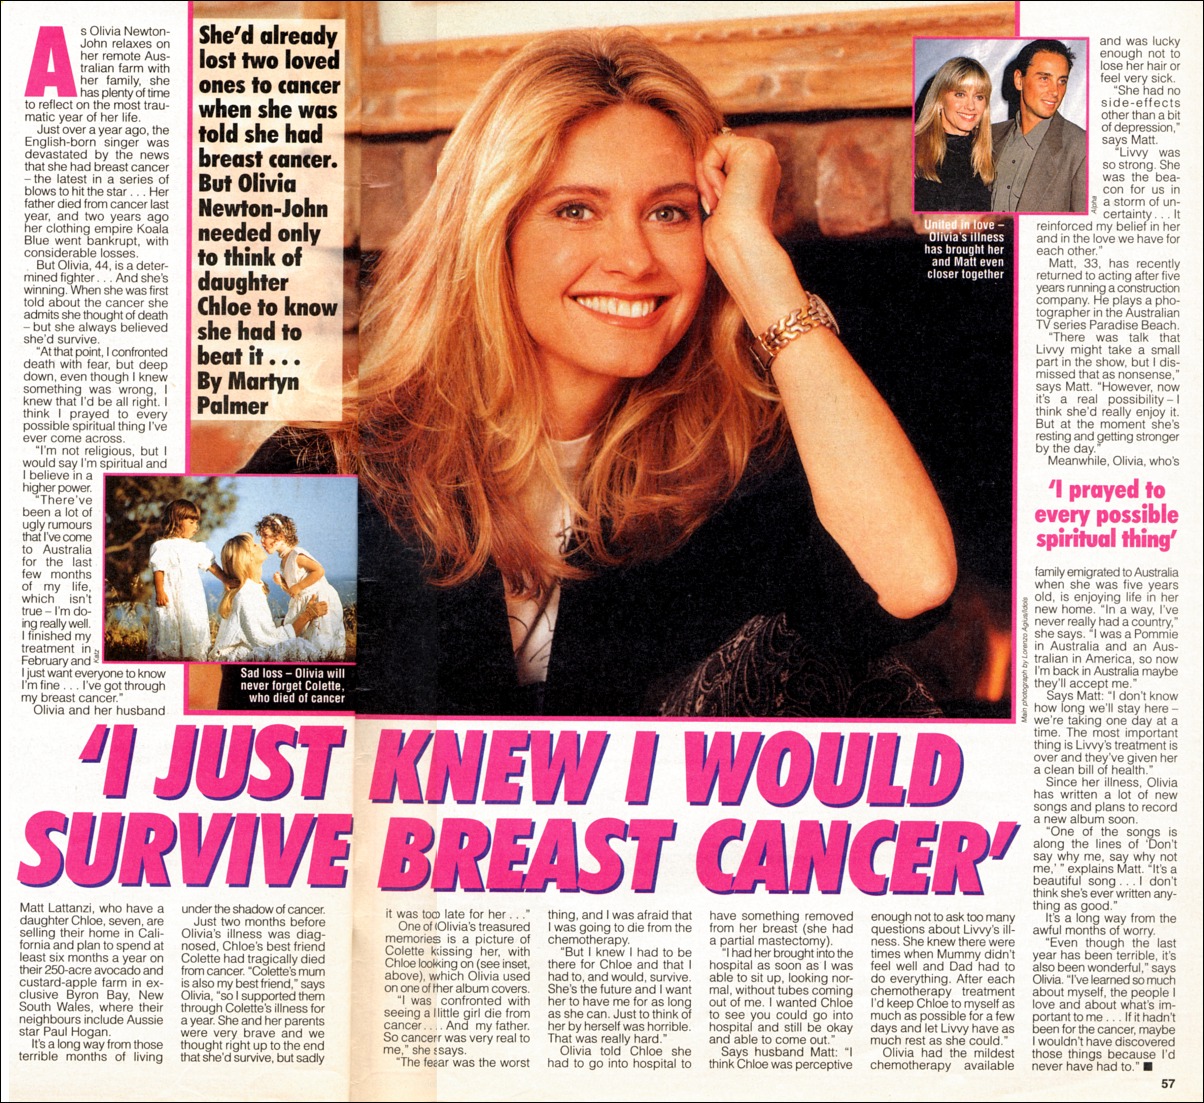 I Knew I Would Survive Breast Cancer - Woman's Own